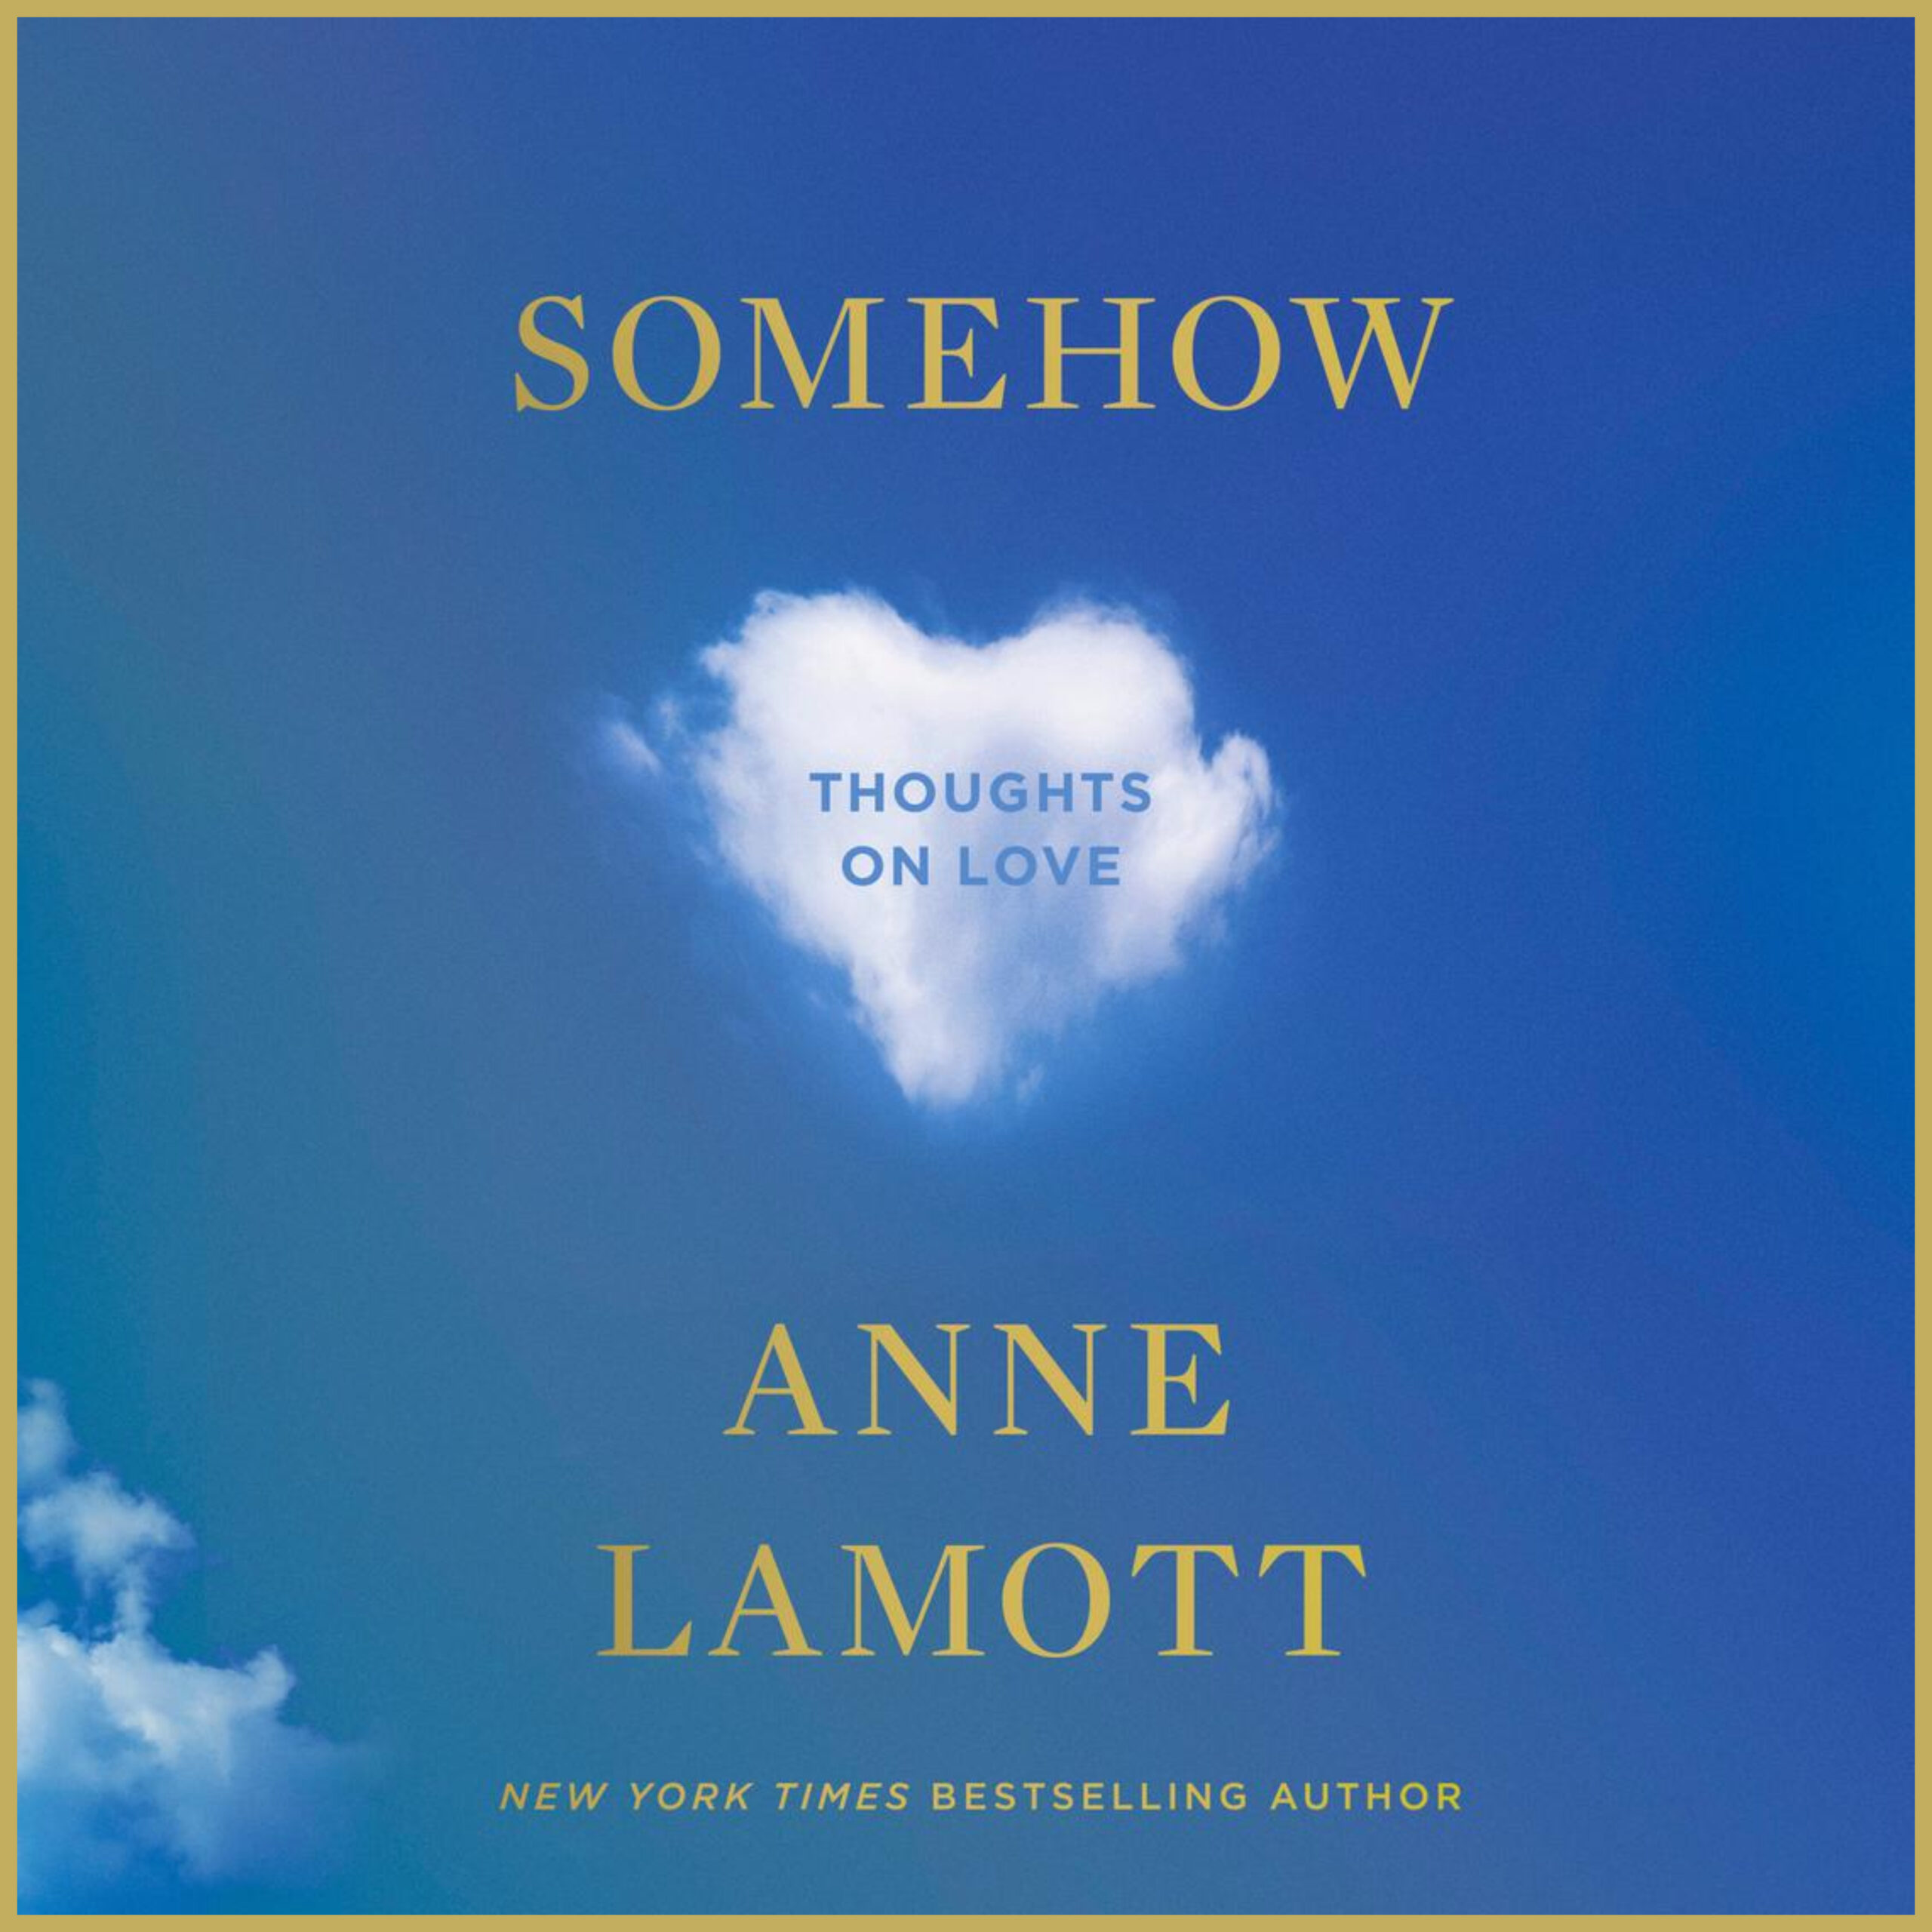 The Book Show | Anne Lamott – Somehow: Thoughts on Love